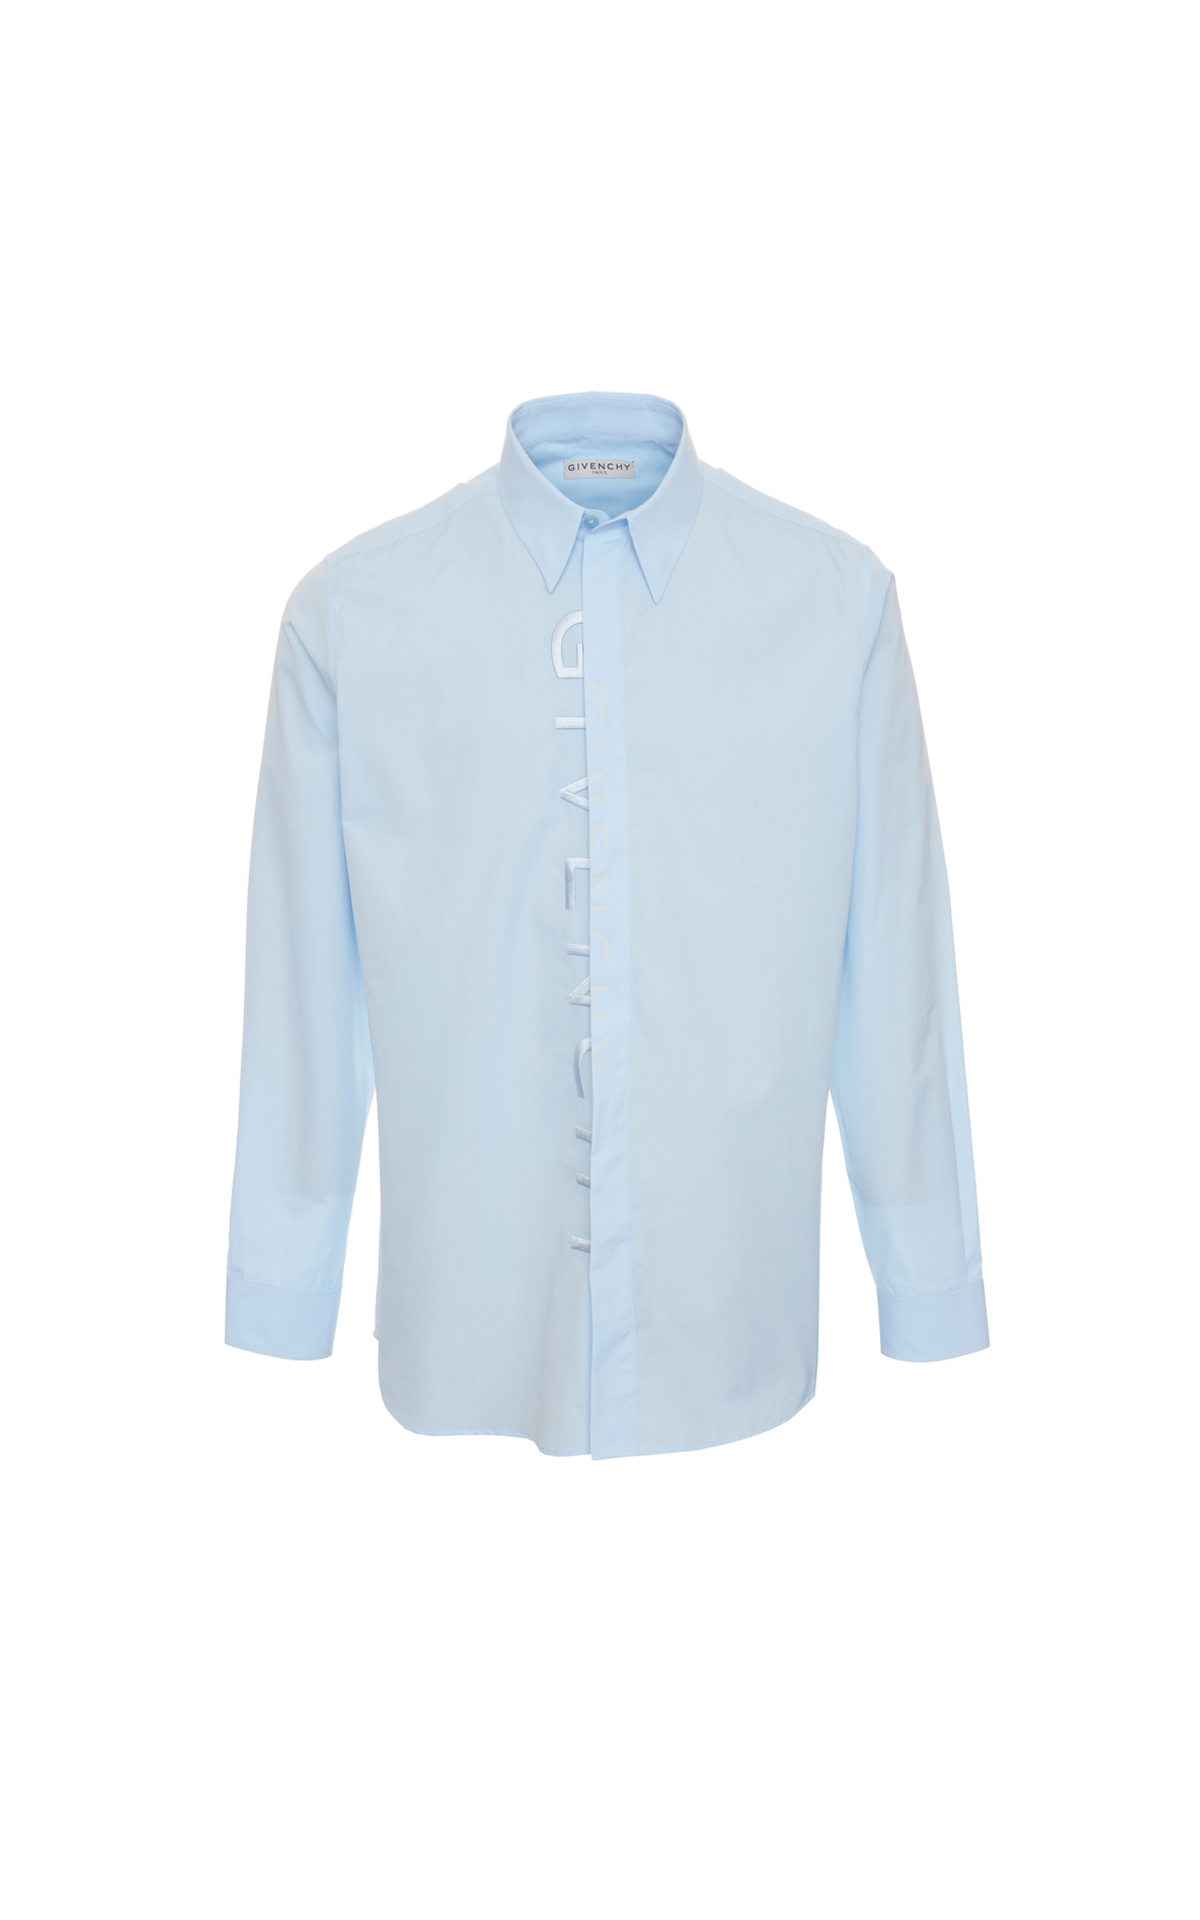 Givenchy Light blue shirt from Bicester Village